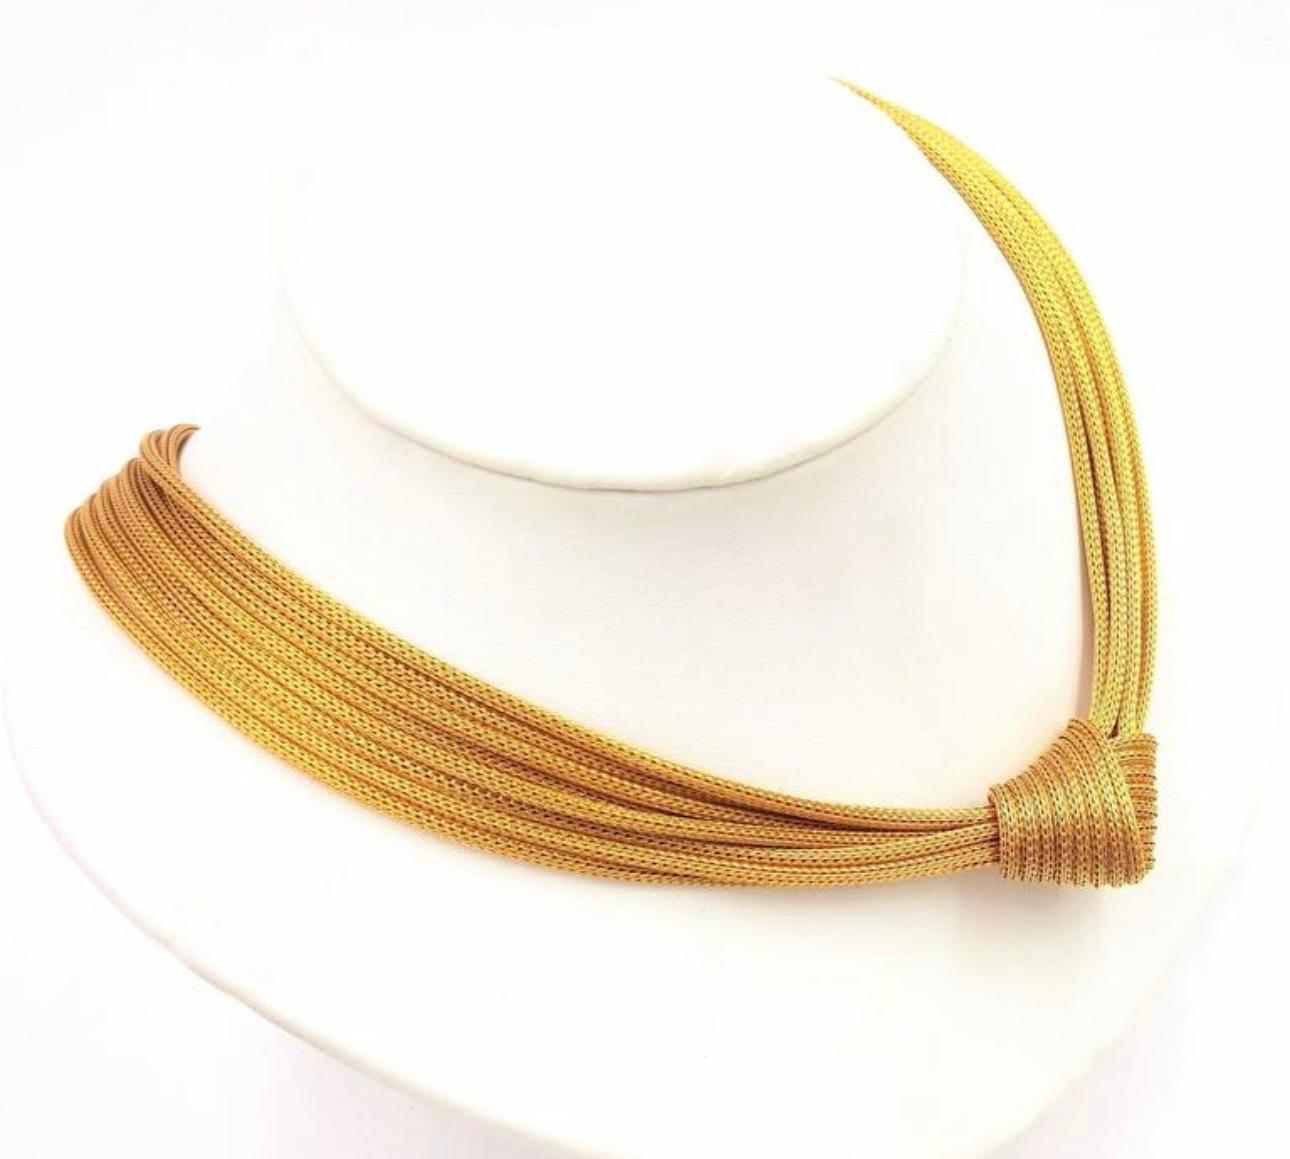  Michael Anthony Designer Love Knot Weaved Mesh Gold Eight Strand Choker Antique In Excellent Condition For Sale In New York, NY